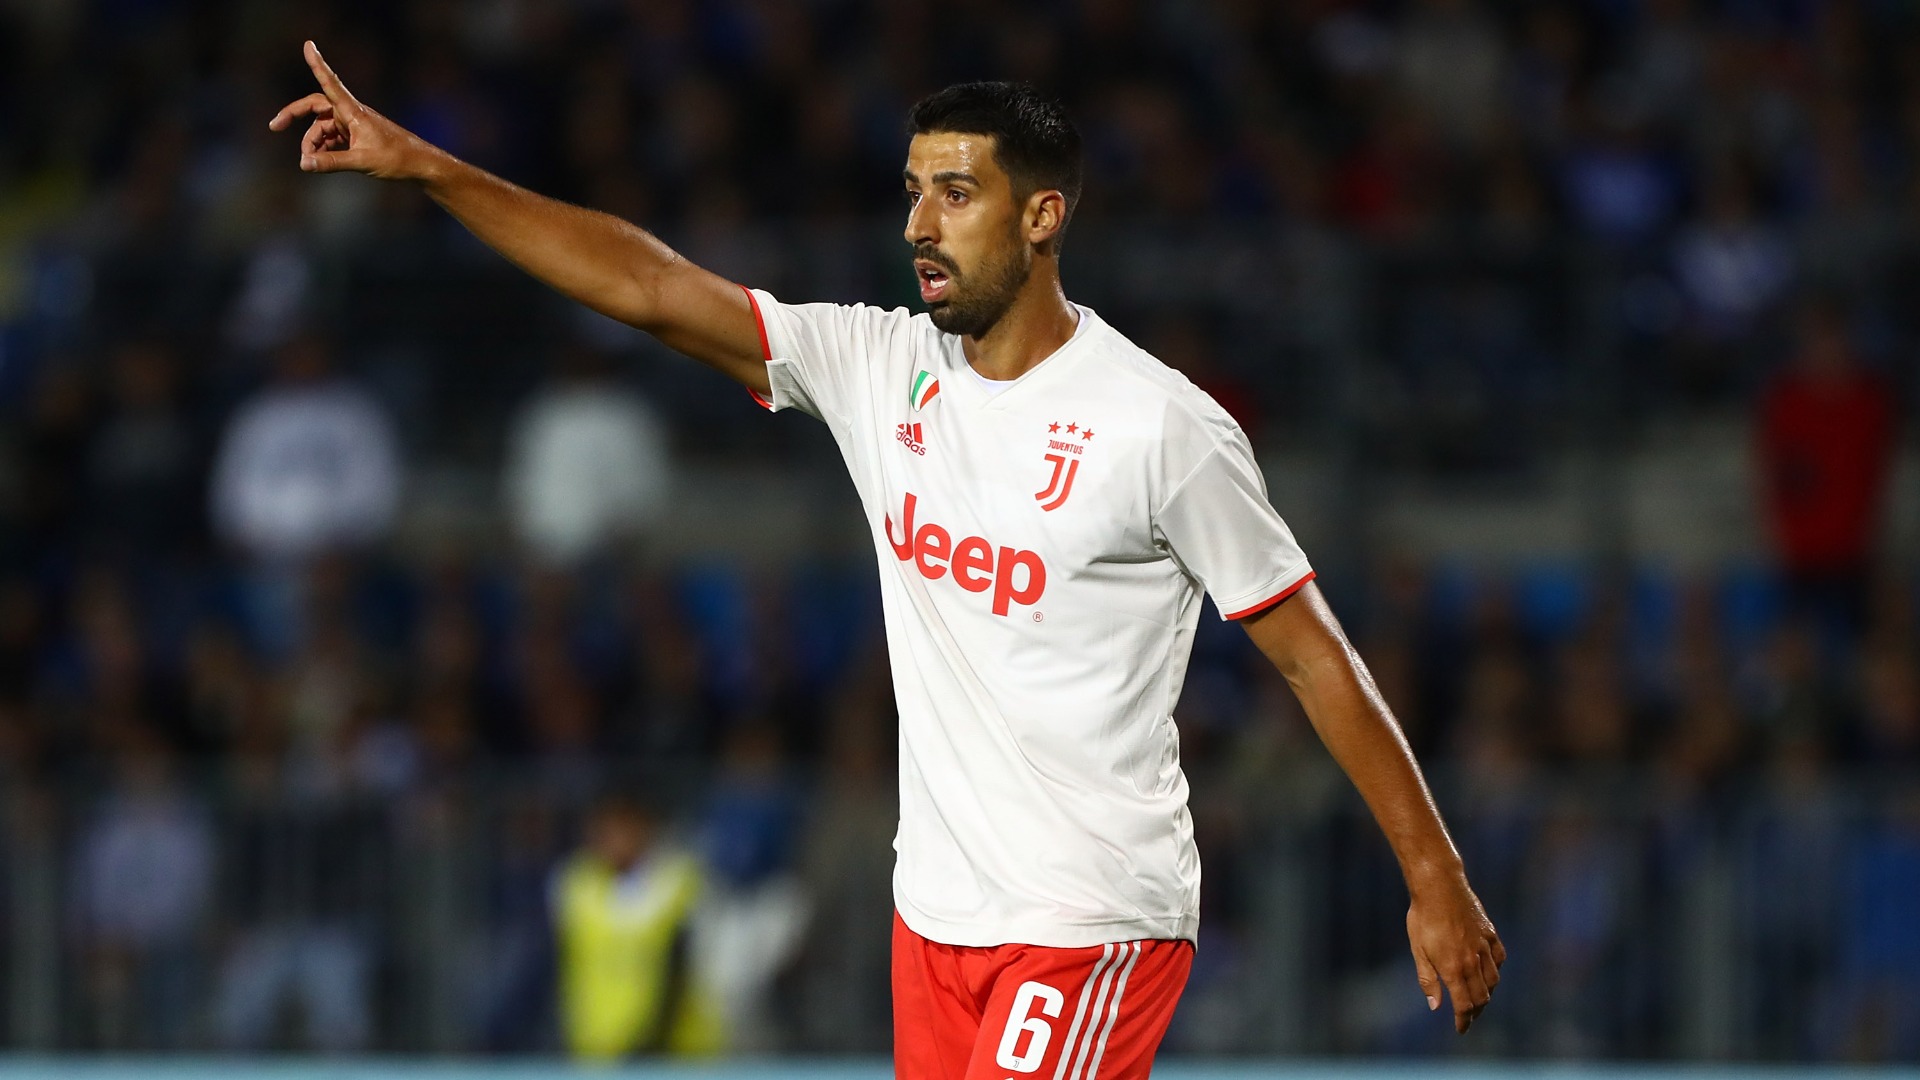 Juventus star Khedira out for three months following knee surgery